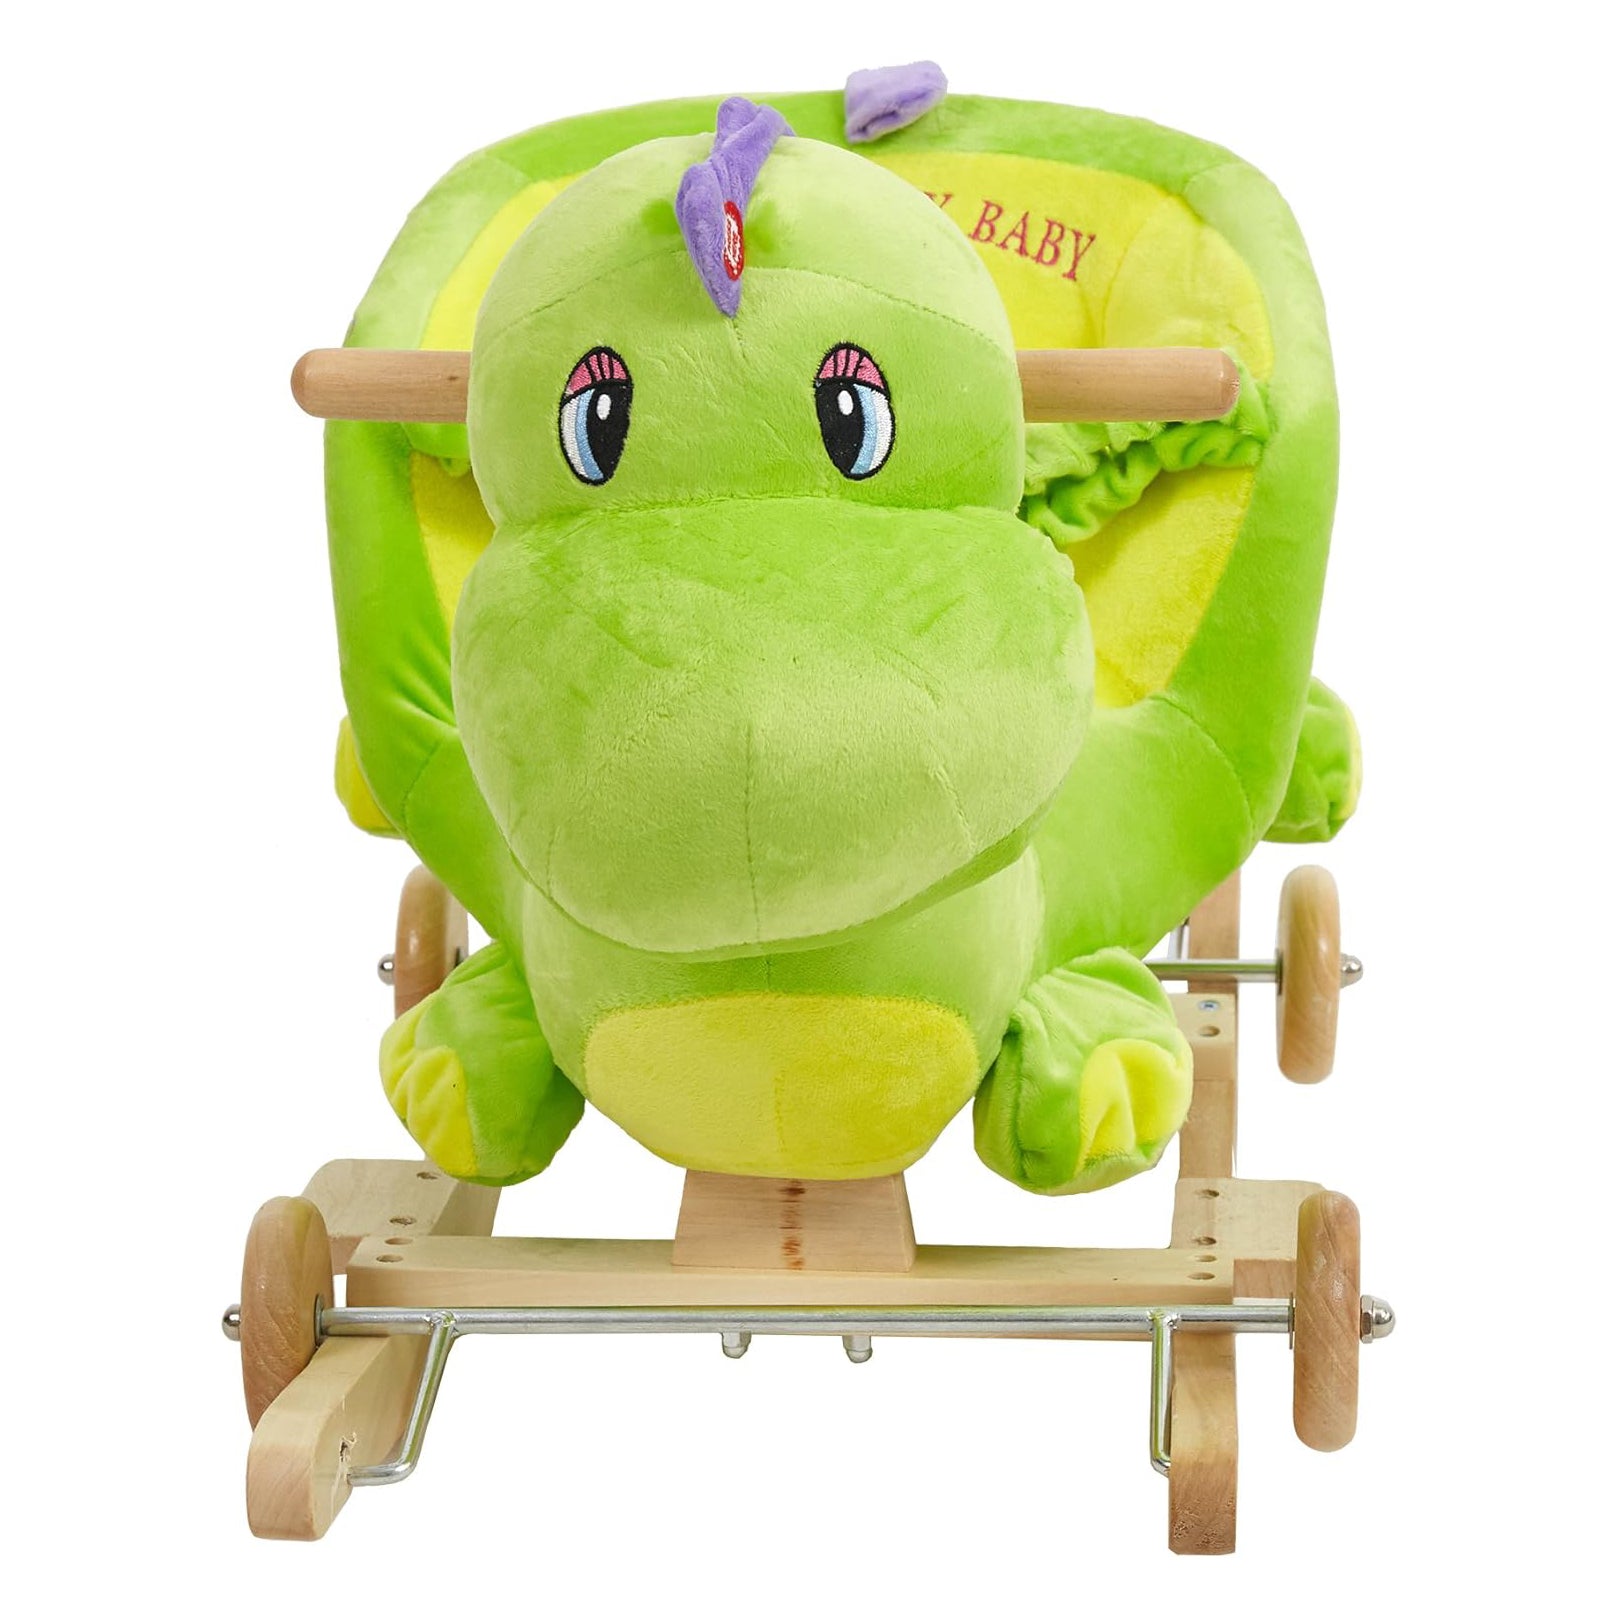 2-in-1 Ride-on Wooden Plush Rocking Horse Chair with Music for Baby Kids Toddlers, Green Dinosaur